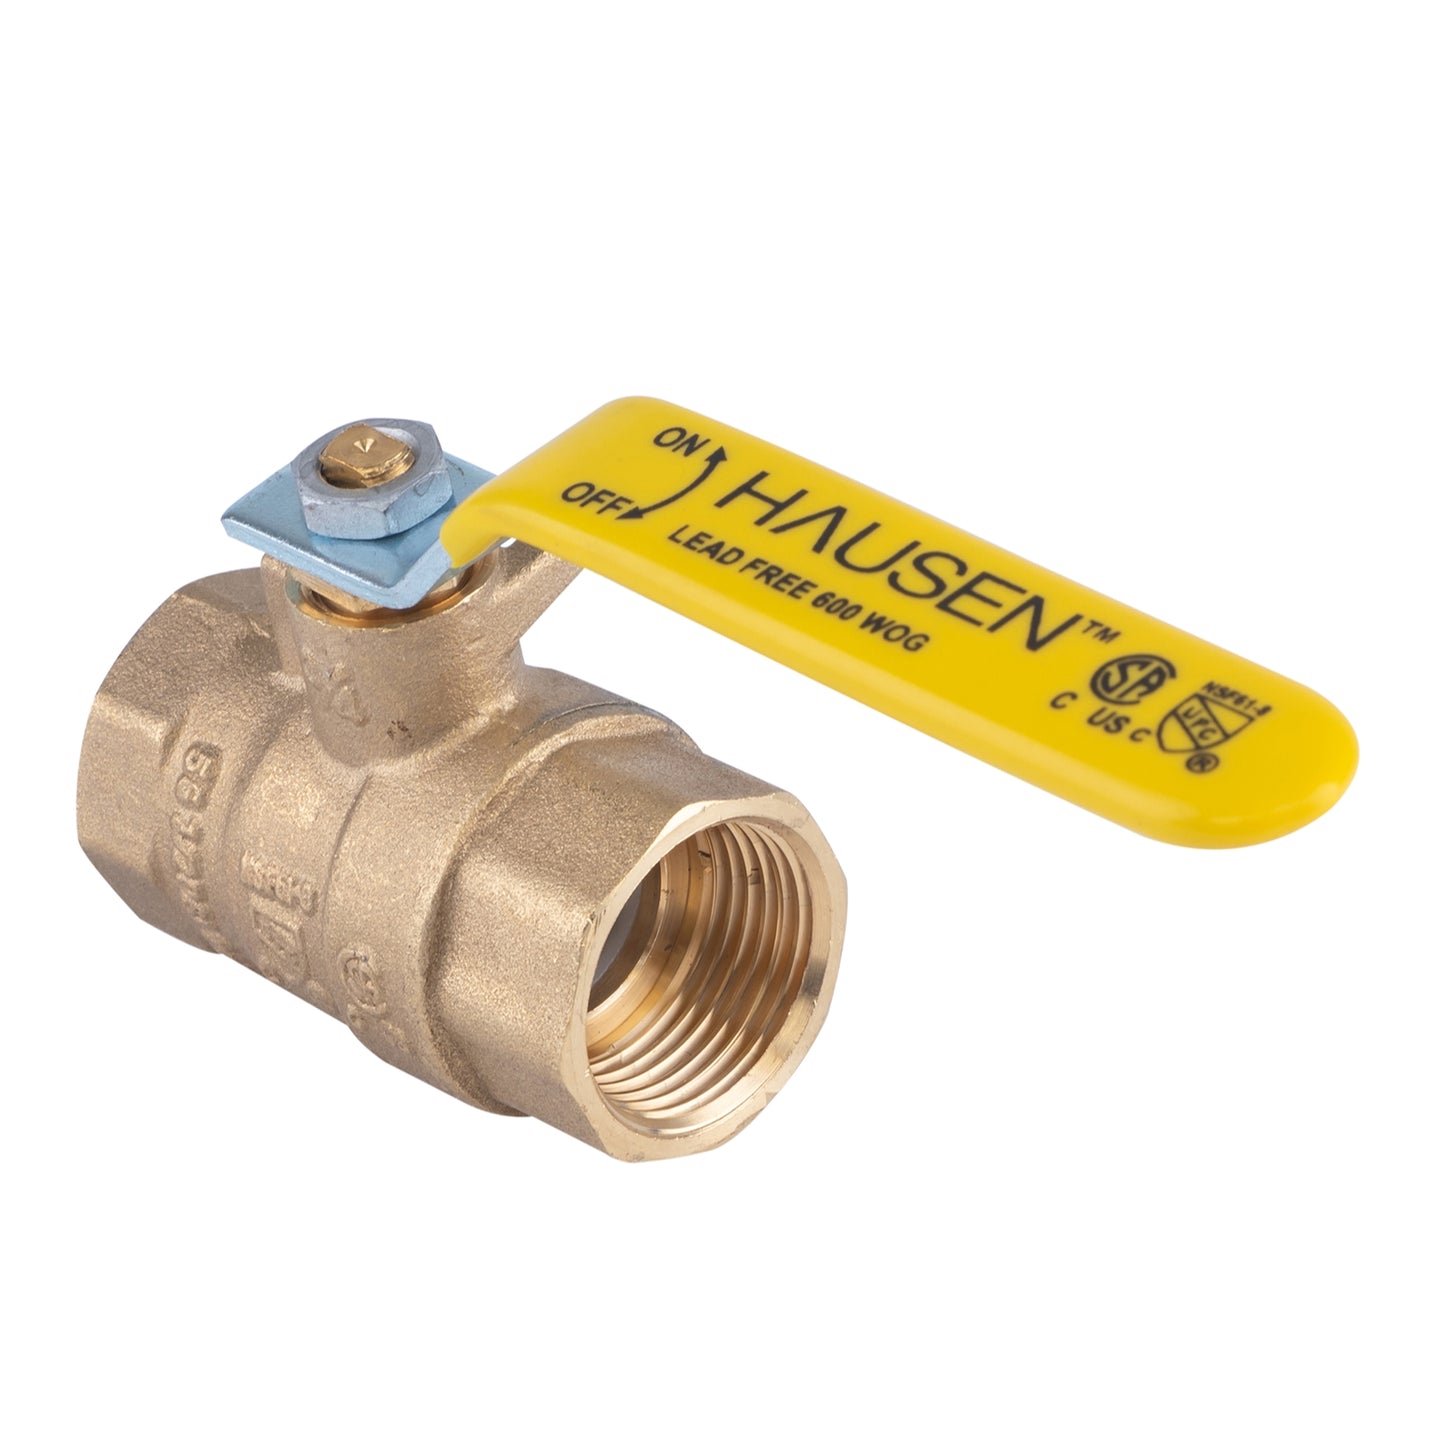 Hausen 3/4-inch FIP (Female Iron Pipe) x 3/4-inch FIP (Female Iron Pipe) Full Port Threaded Brass Ball Valve; Blowout Resistant Stem; For Use in Potable Water Distribution Systems, 5-Pack